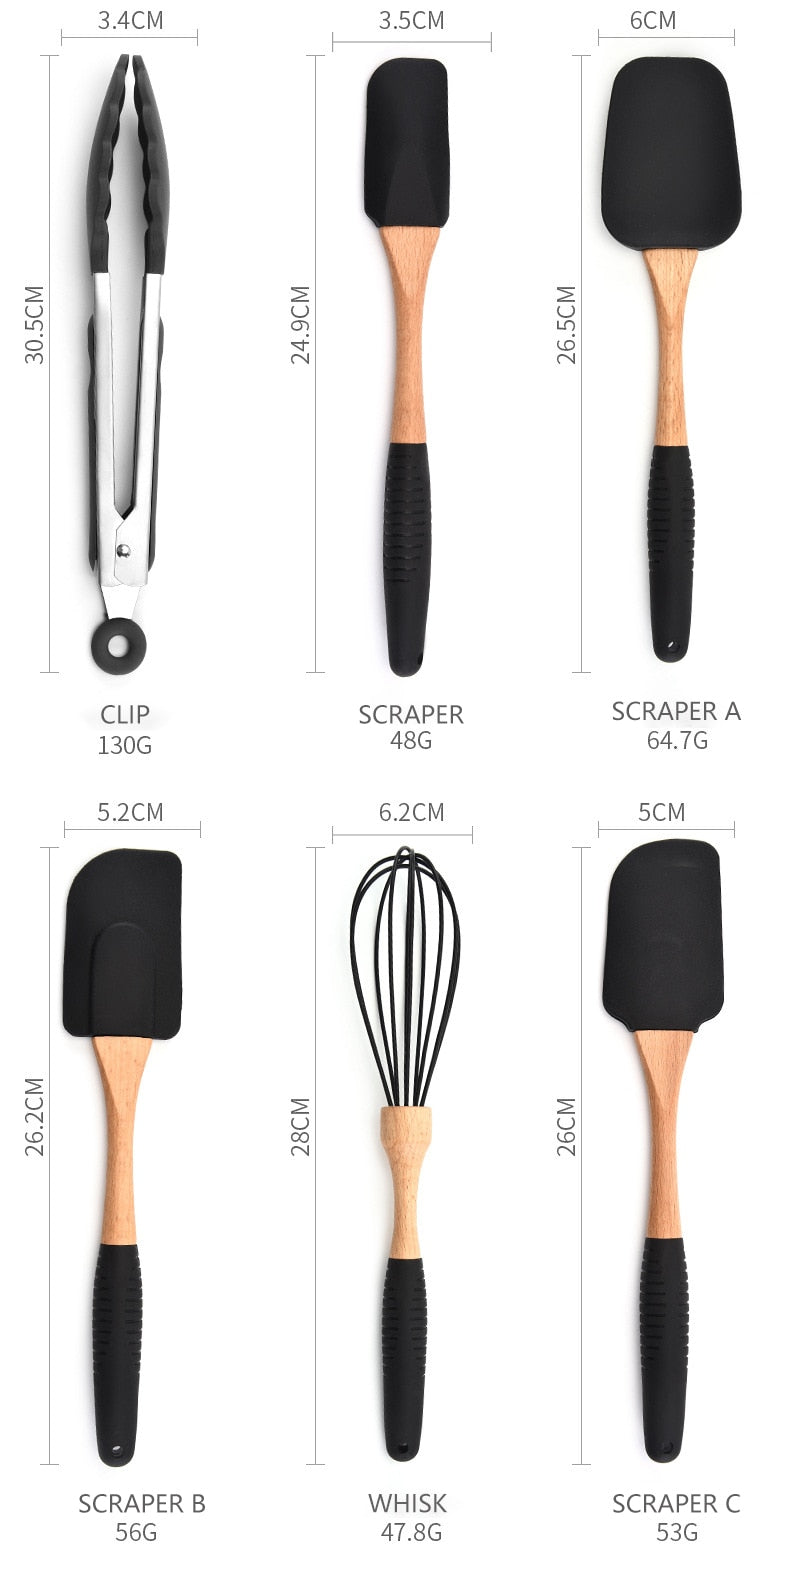 Silicone Wood Cooking Utensils